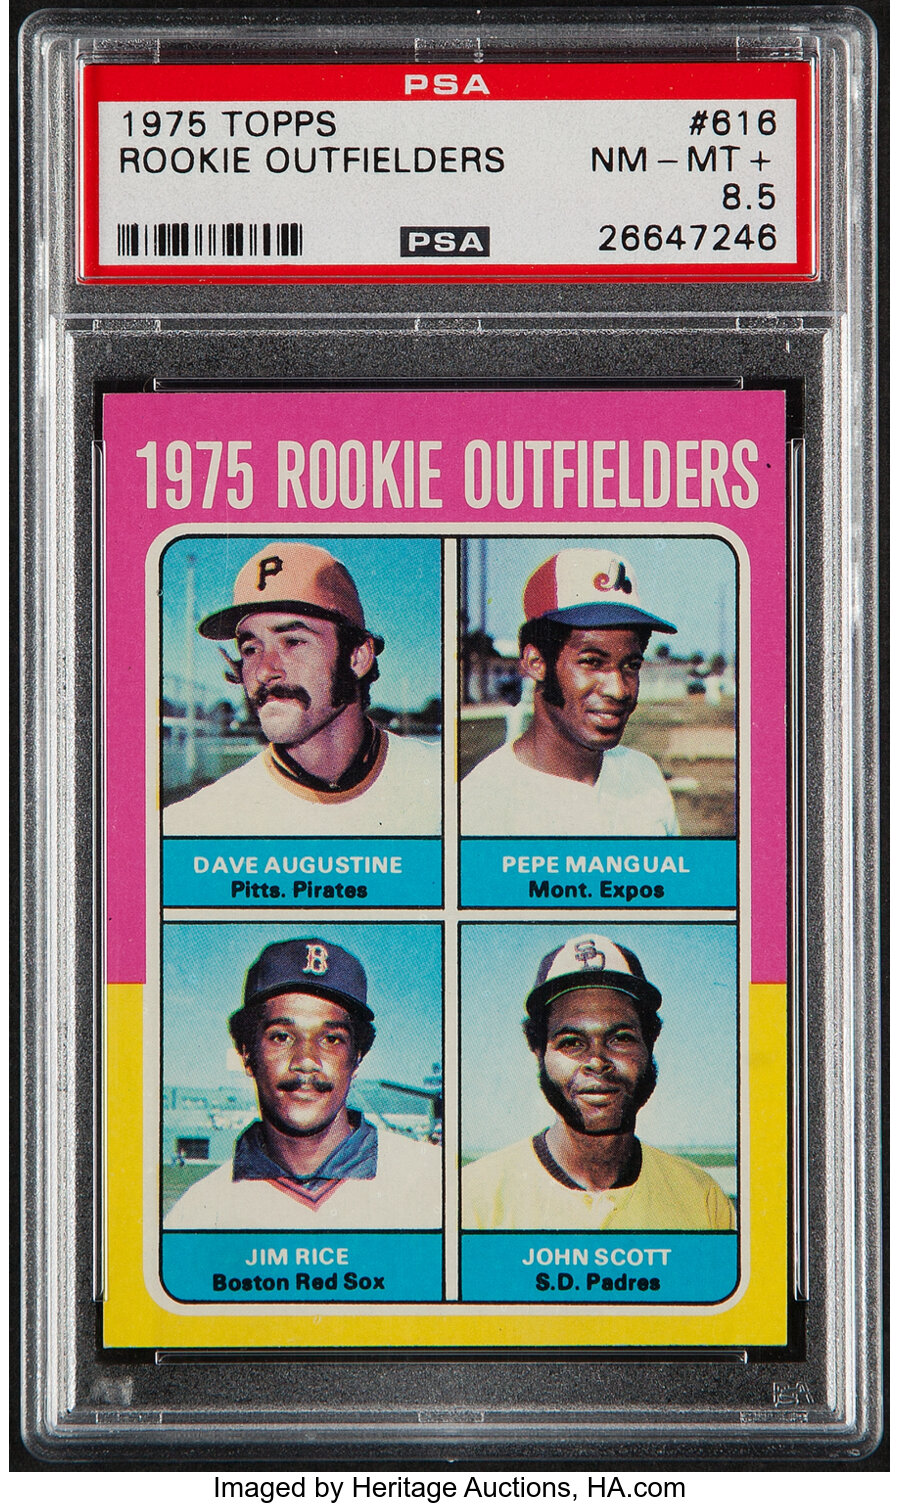 1975 Topps Jim Rice - Rookie Outfielders #616 PSA NM-MT+ 8.5